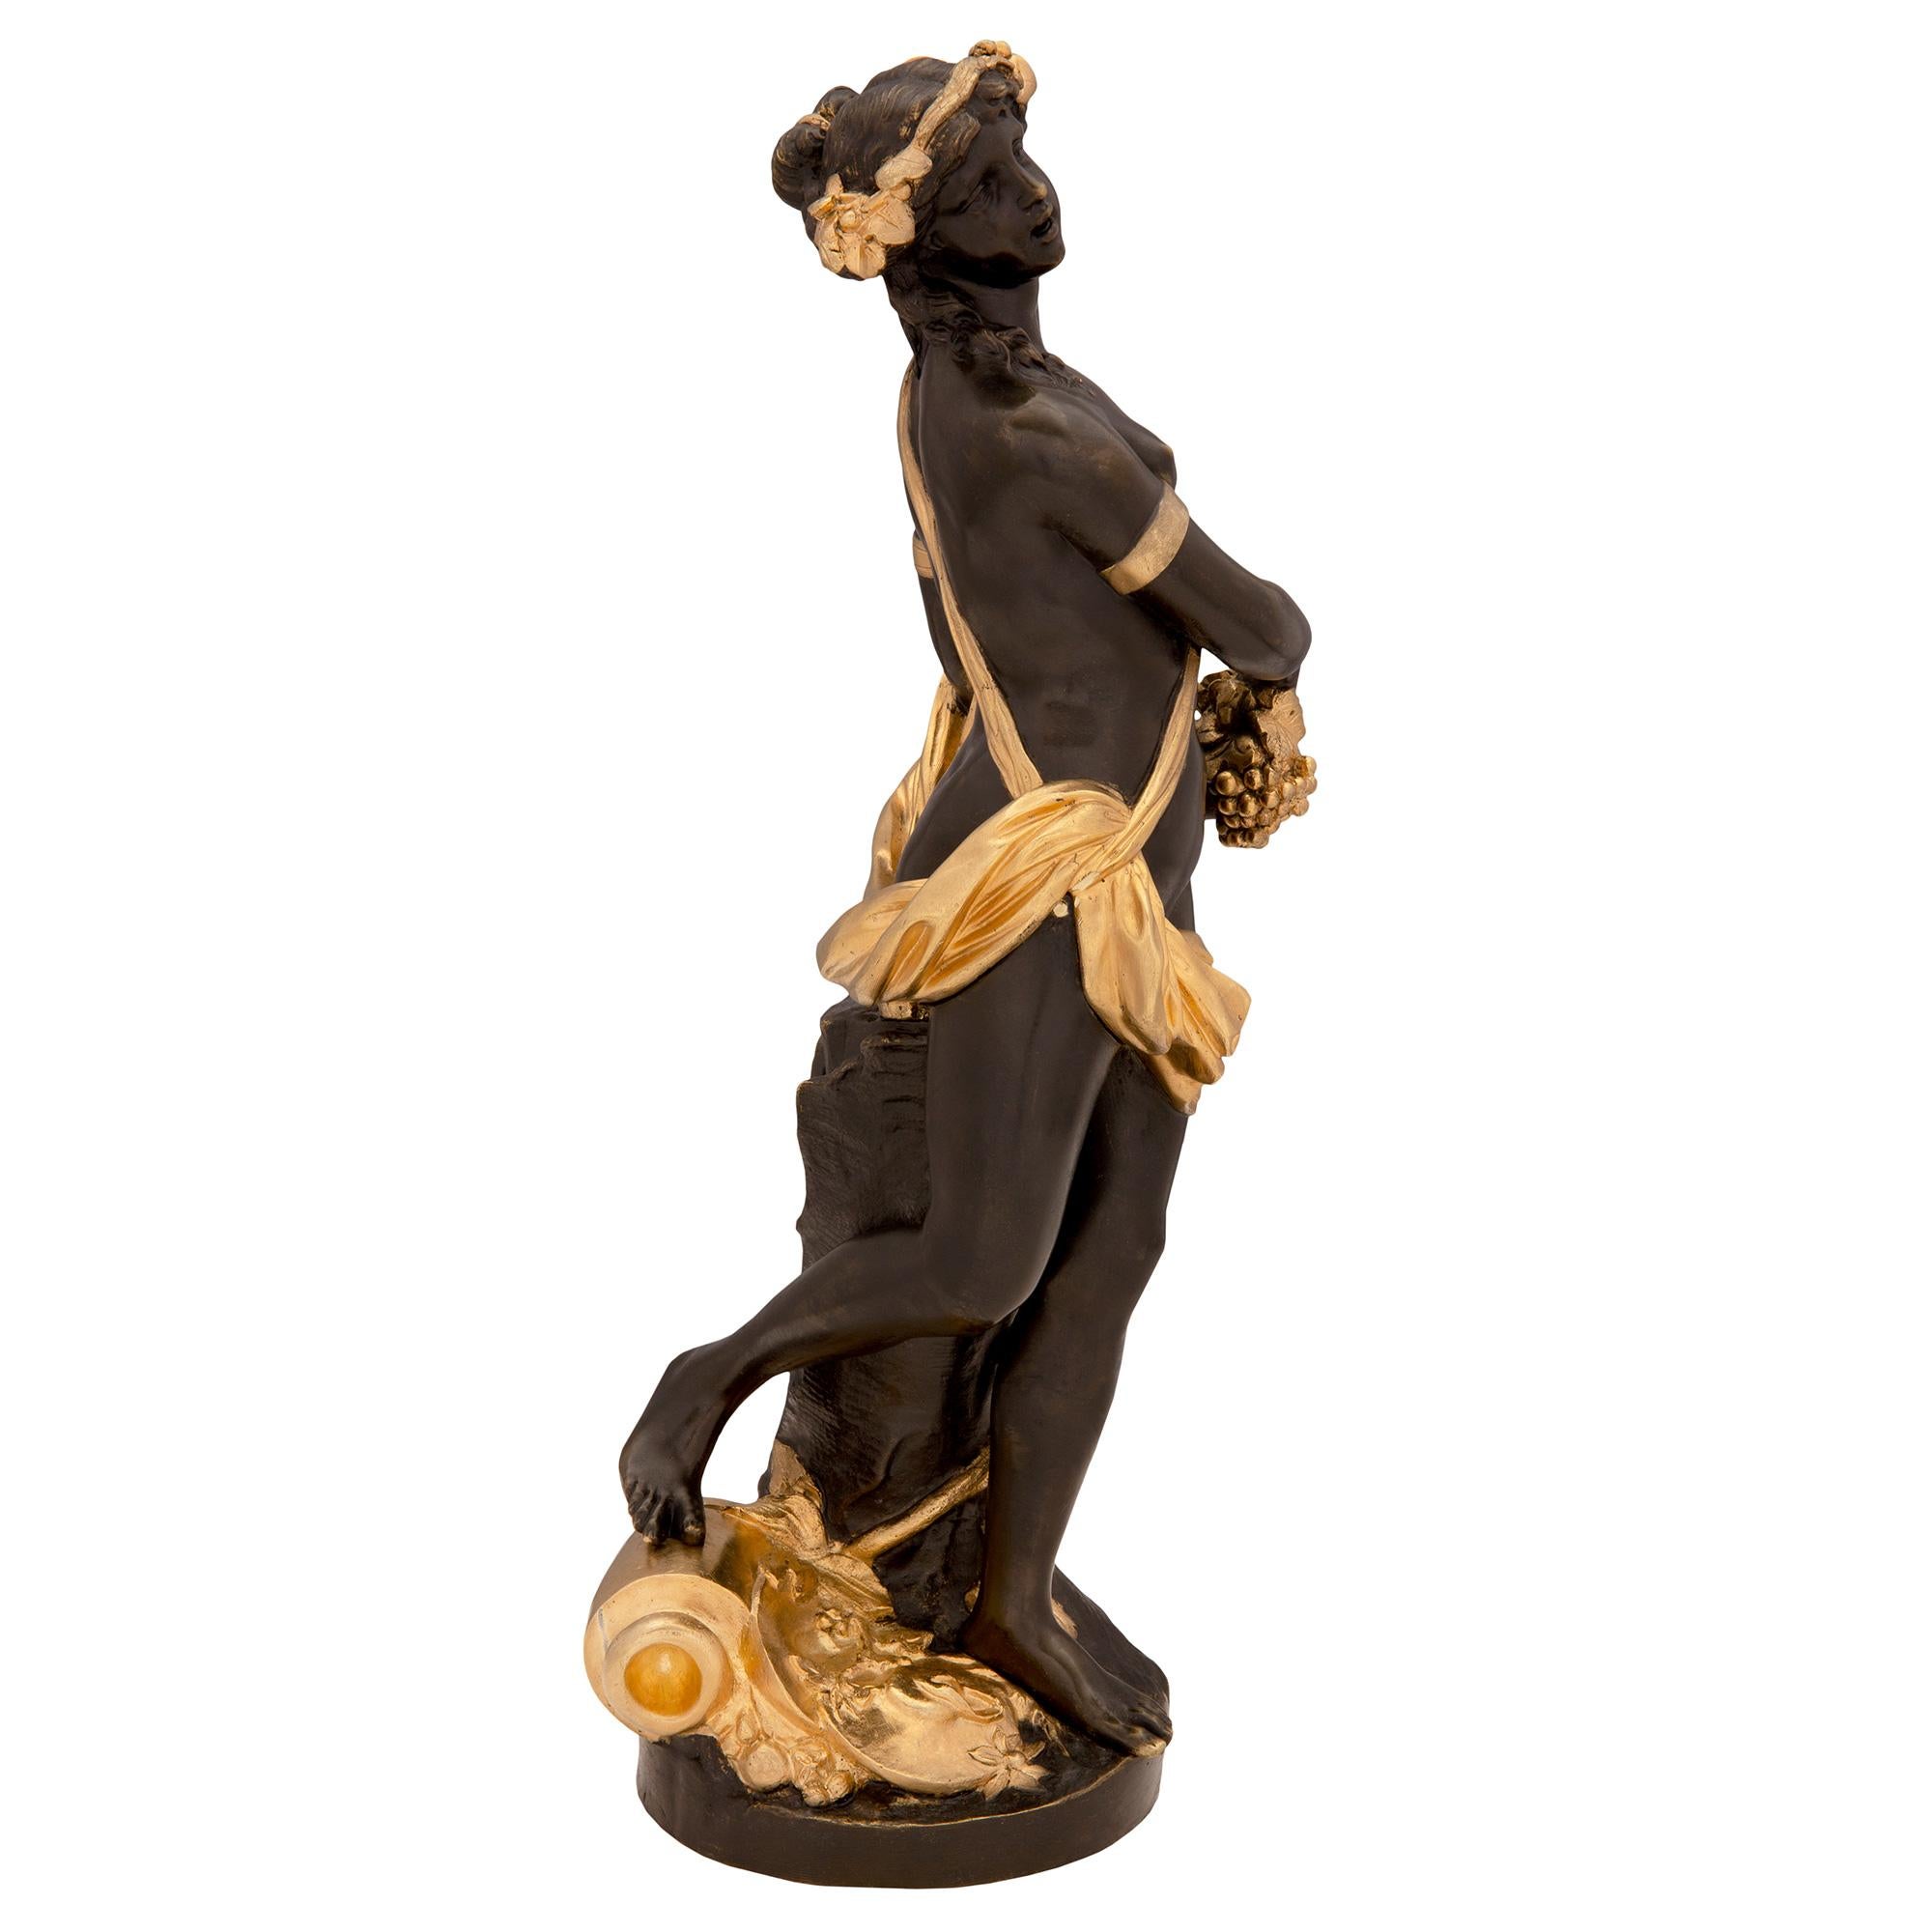 A striking French 19th century Louis XVI st. patinated bronze and ormolu statue. The statue is raised by a circular base with a tree trunk and a fallen water vessel amidst fine foliate and floral designs. Above is a beautiful richly chased maiden